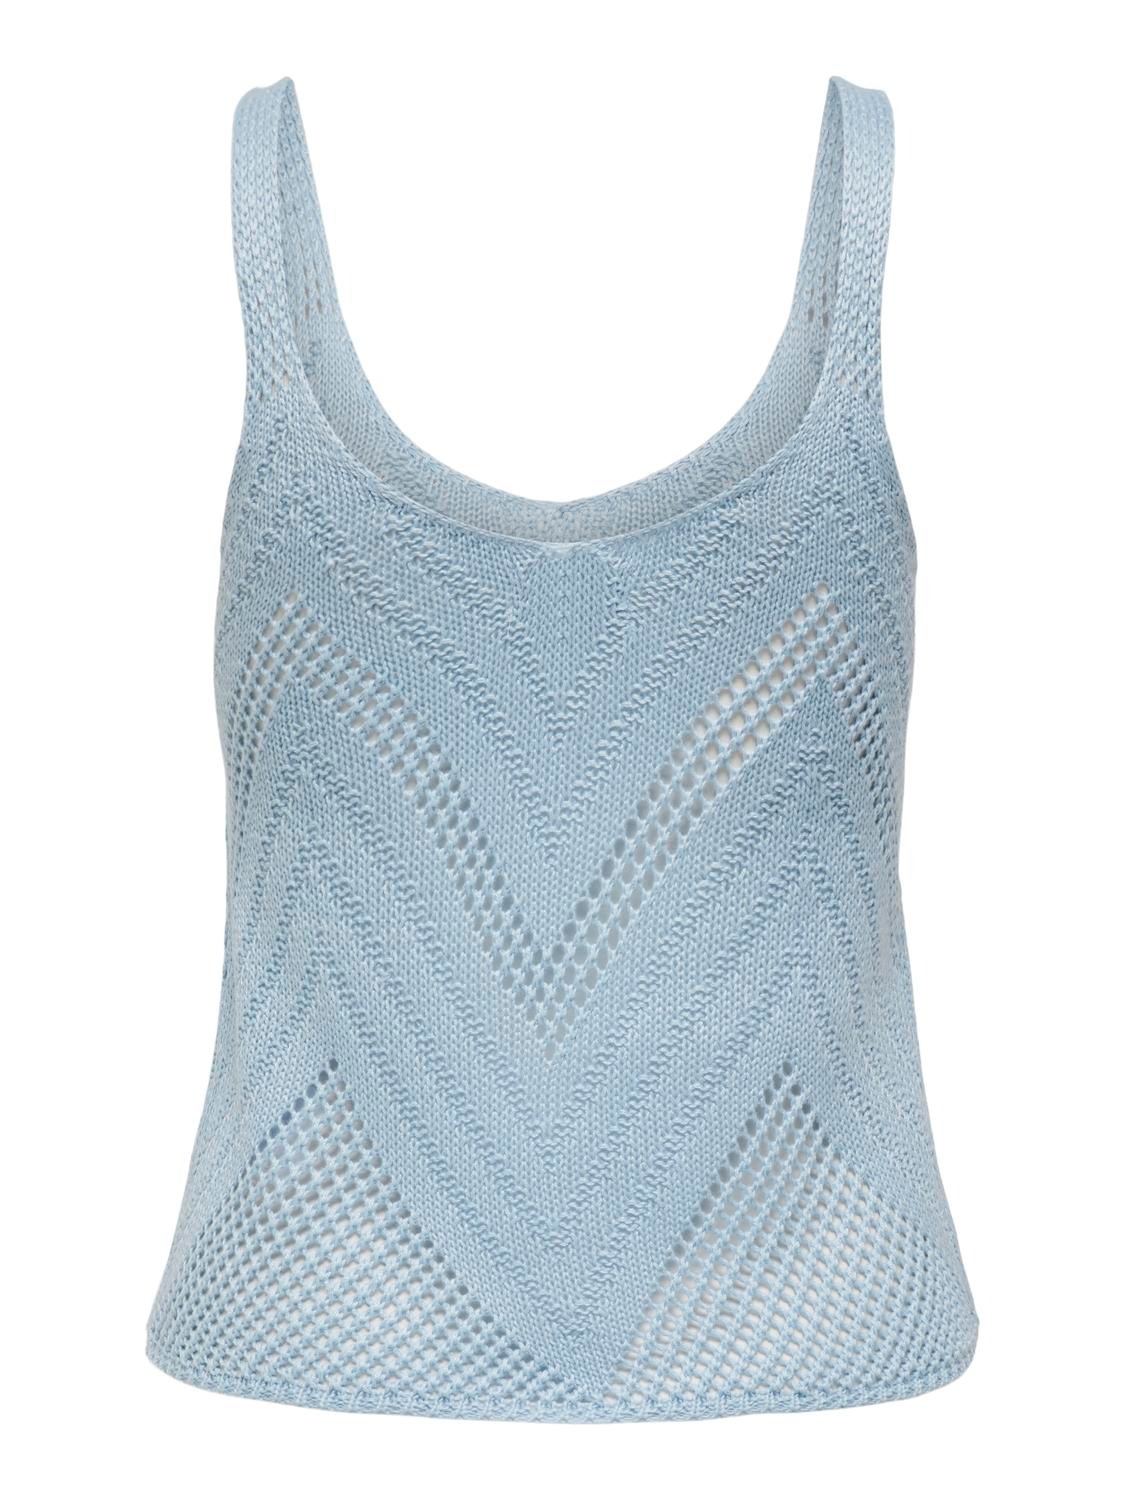 ONLY Textured Knitted Top -Cashmere Blue - 15226348